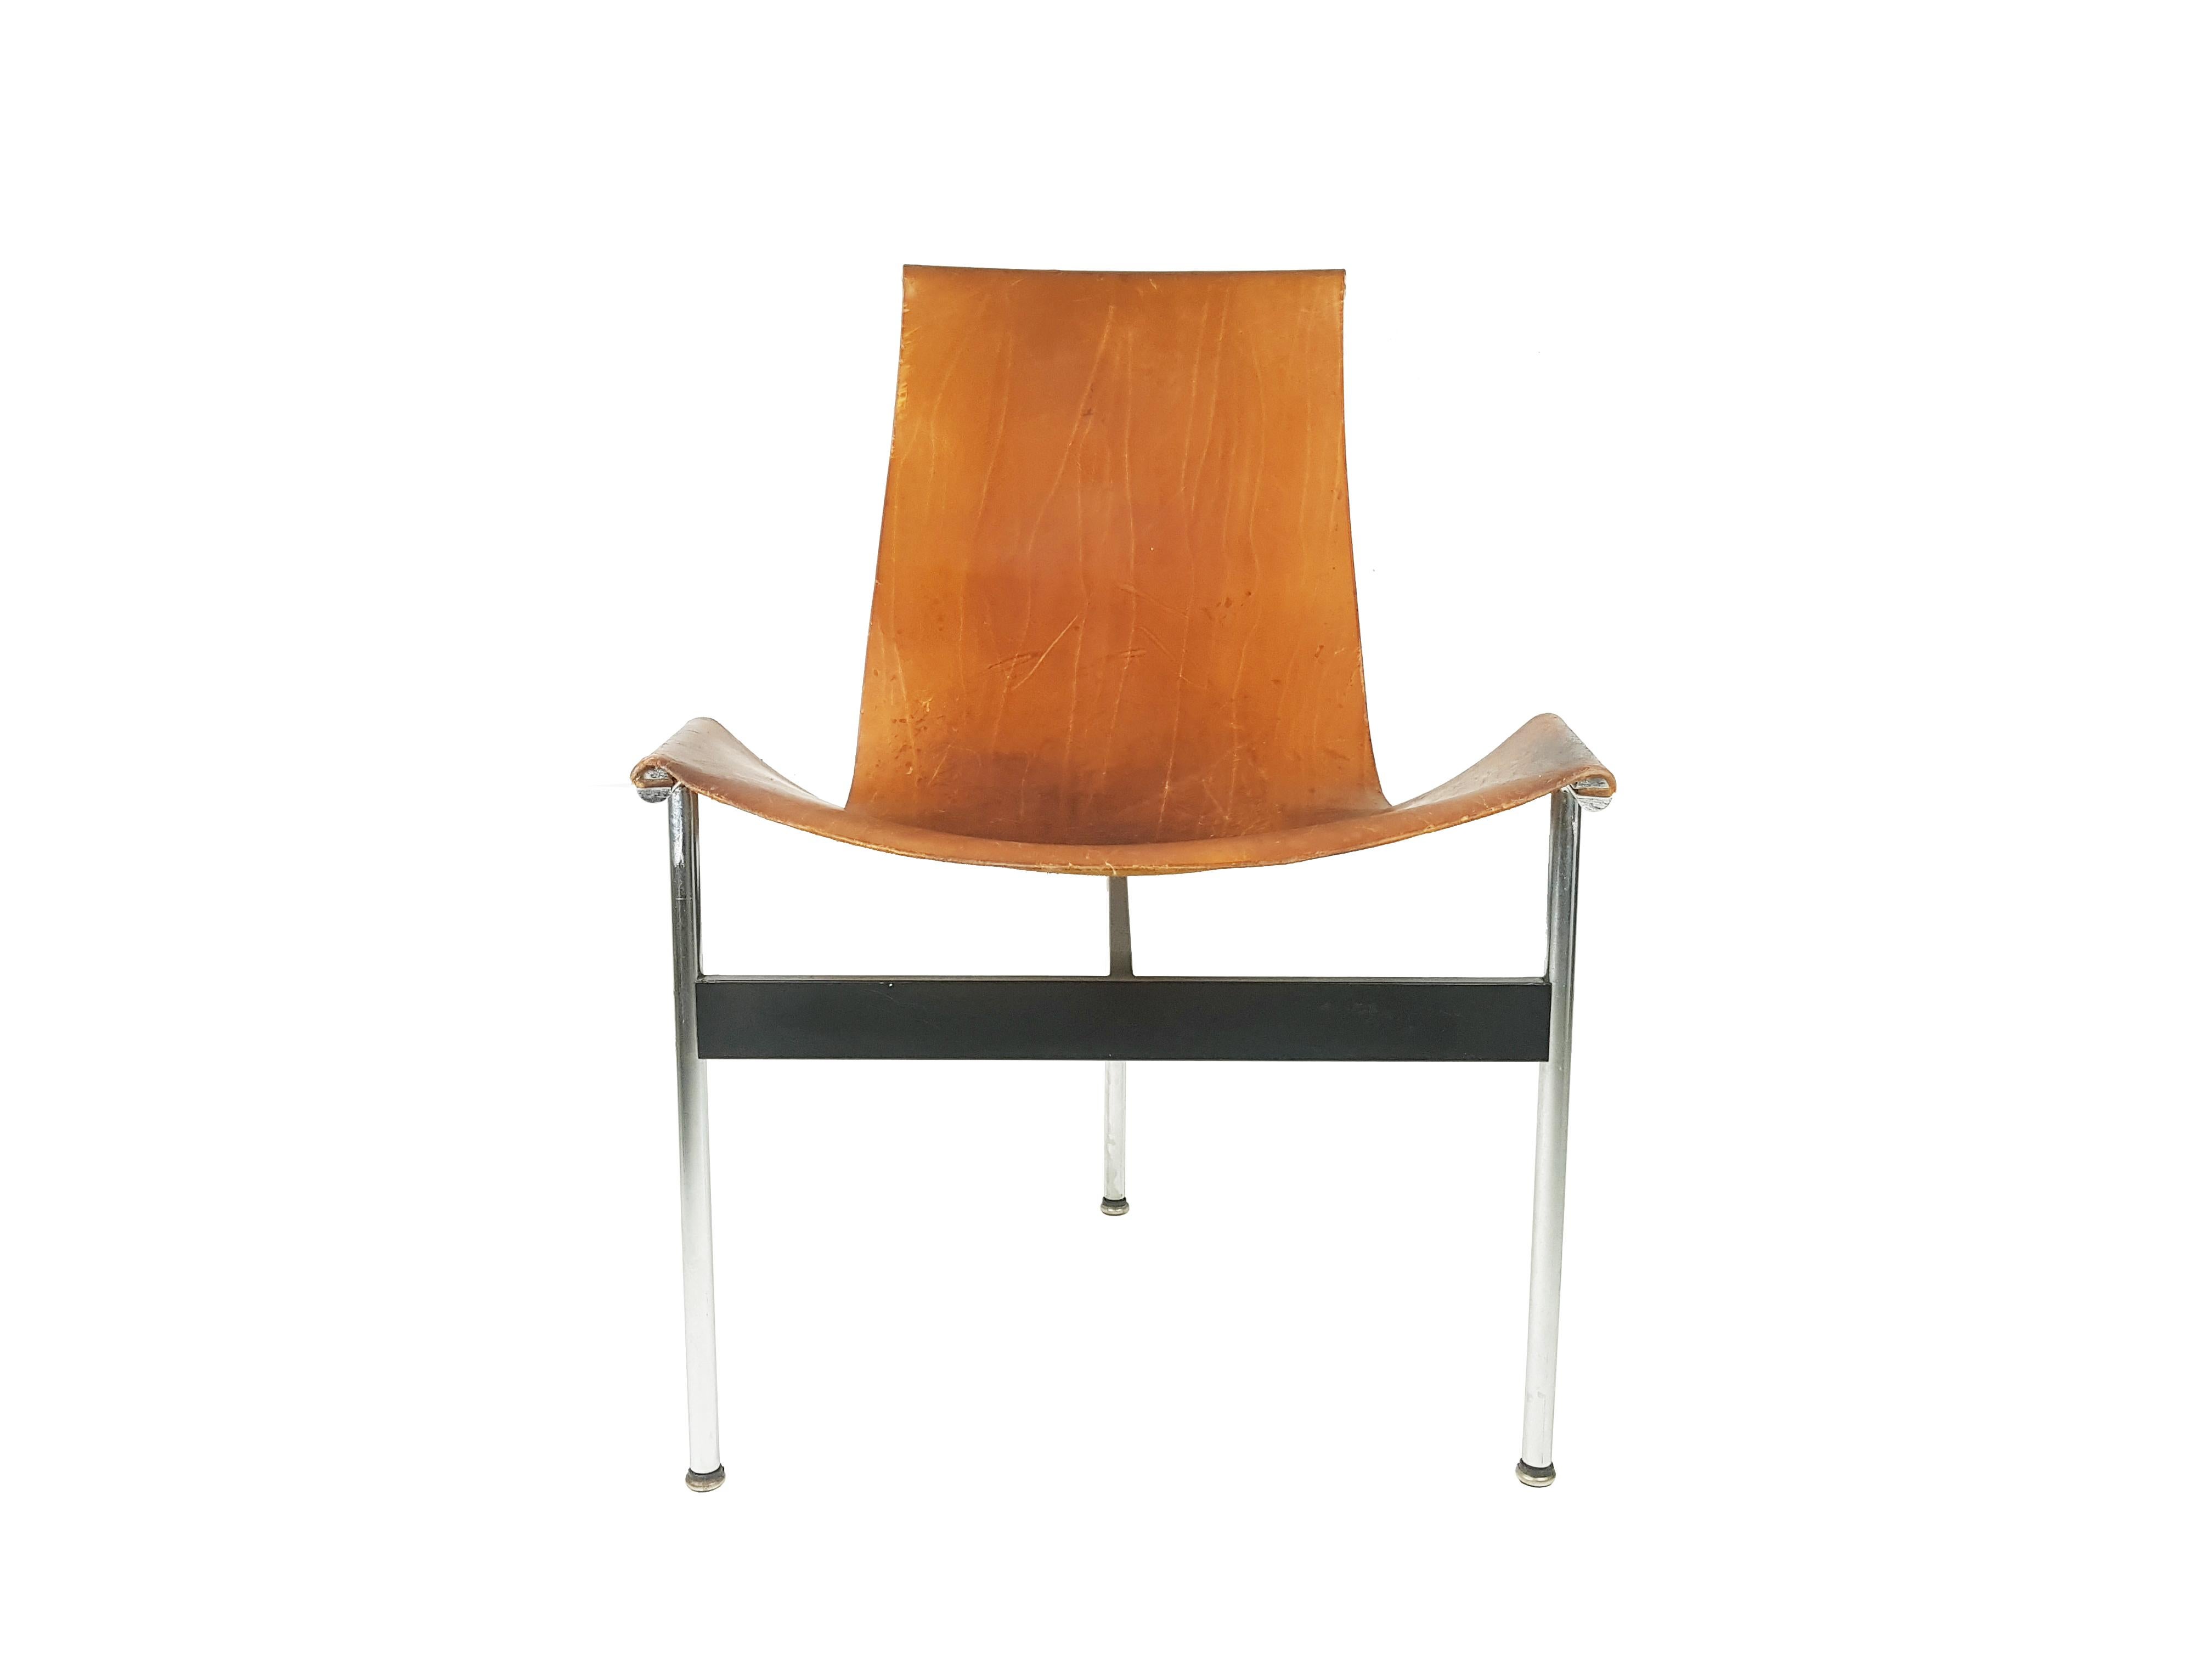 This T chair model 3LC was designed by Douglas Kelly, Ross Littell and William Katavolos for Laverne International in New York in 1952. The chair is made from chromed tubular steel, lacquered flat steel and natural leather. It remains in a good